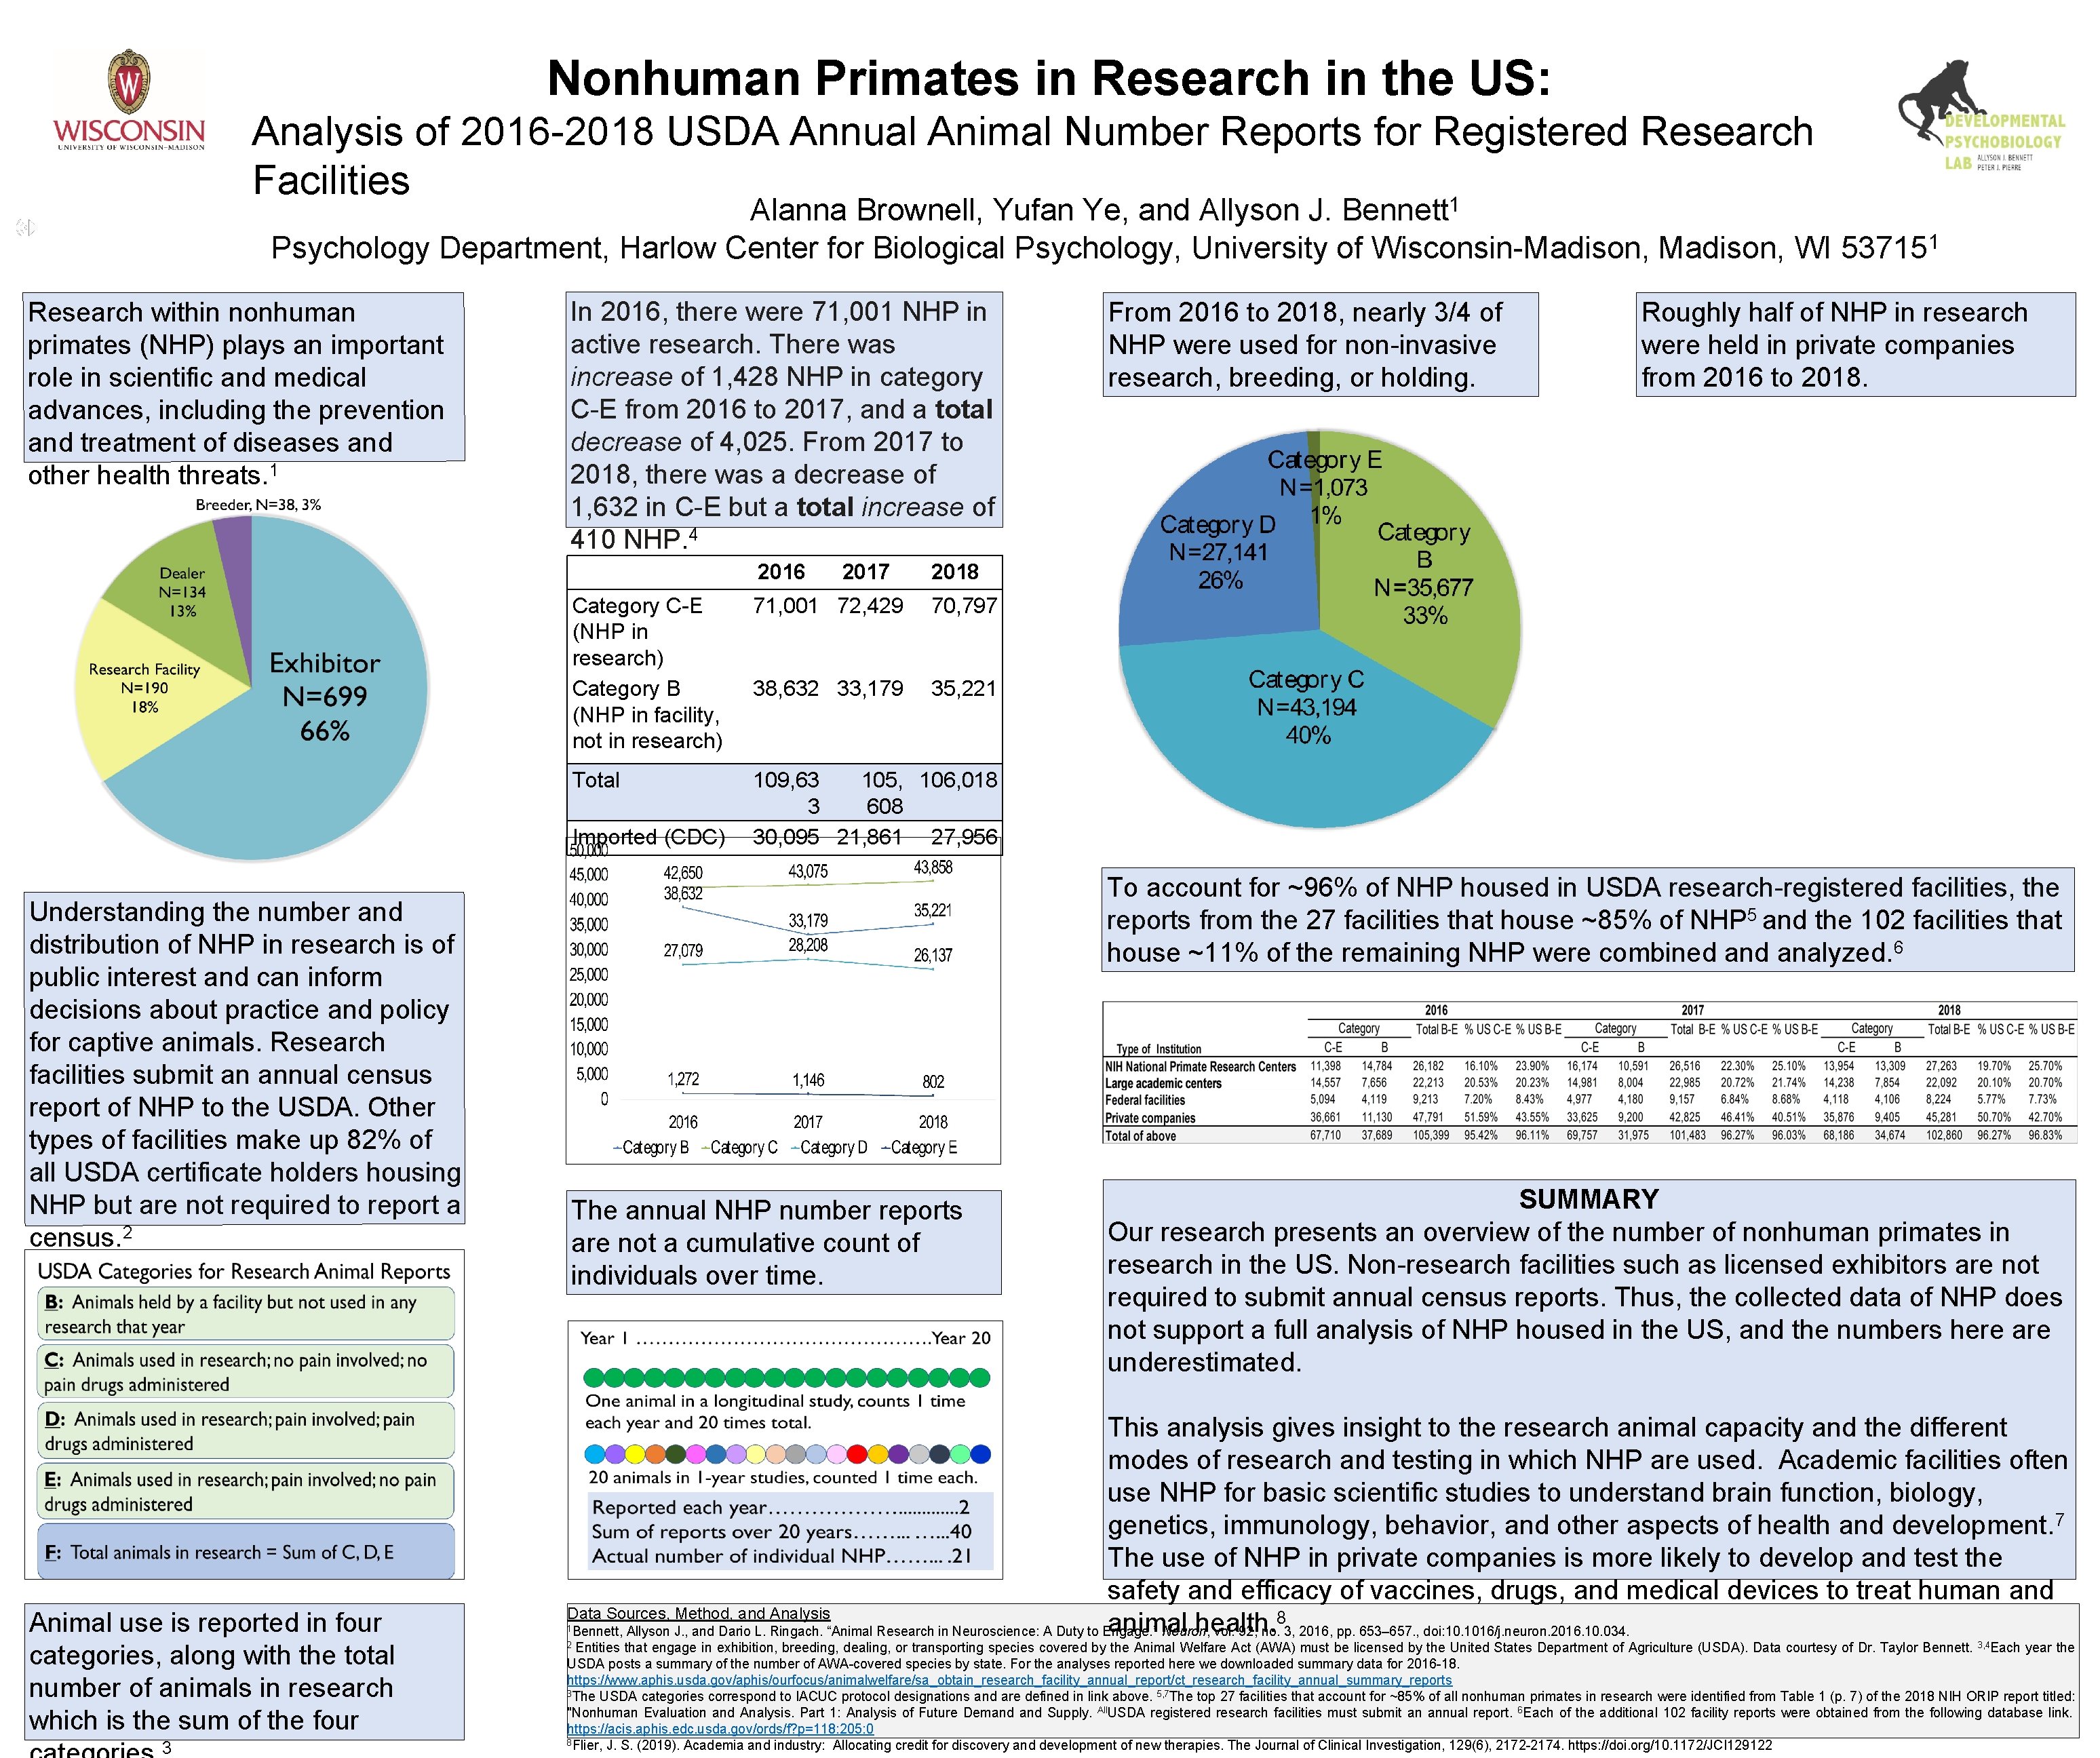 Nonhuman Primates in Research in the US: Analysis of 2016 -2018 USDA Annual Animal